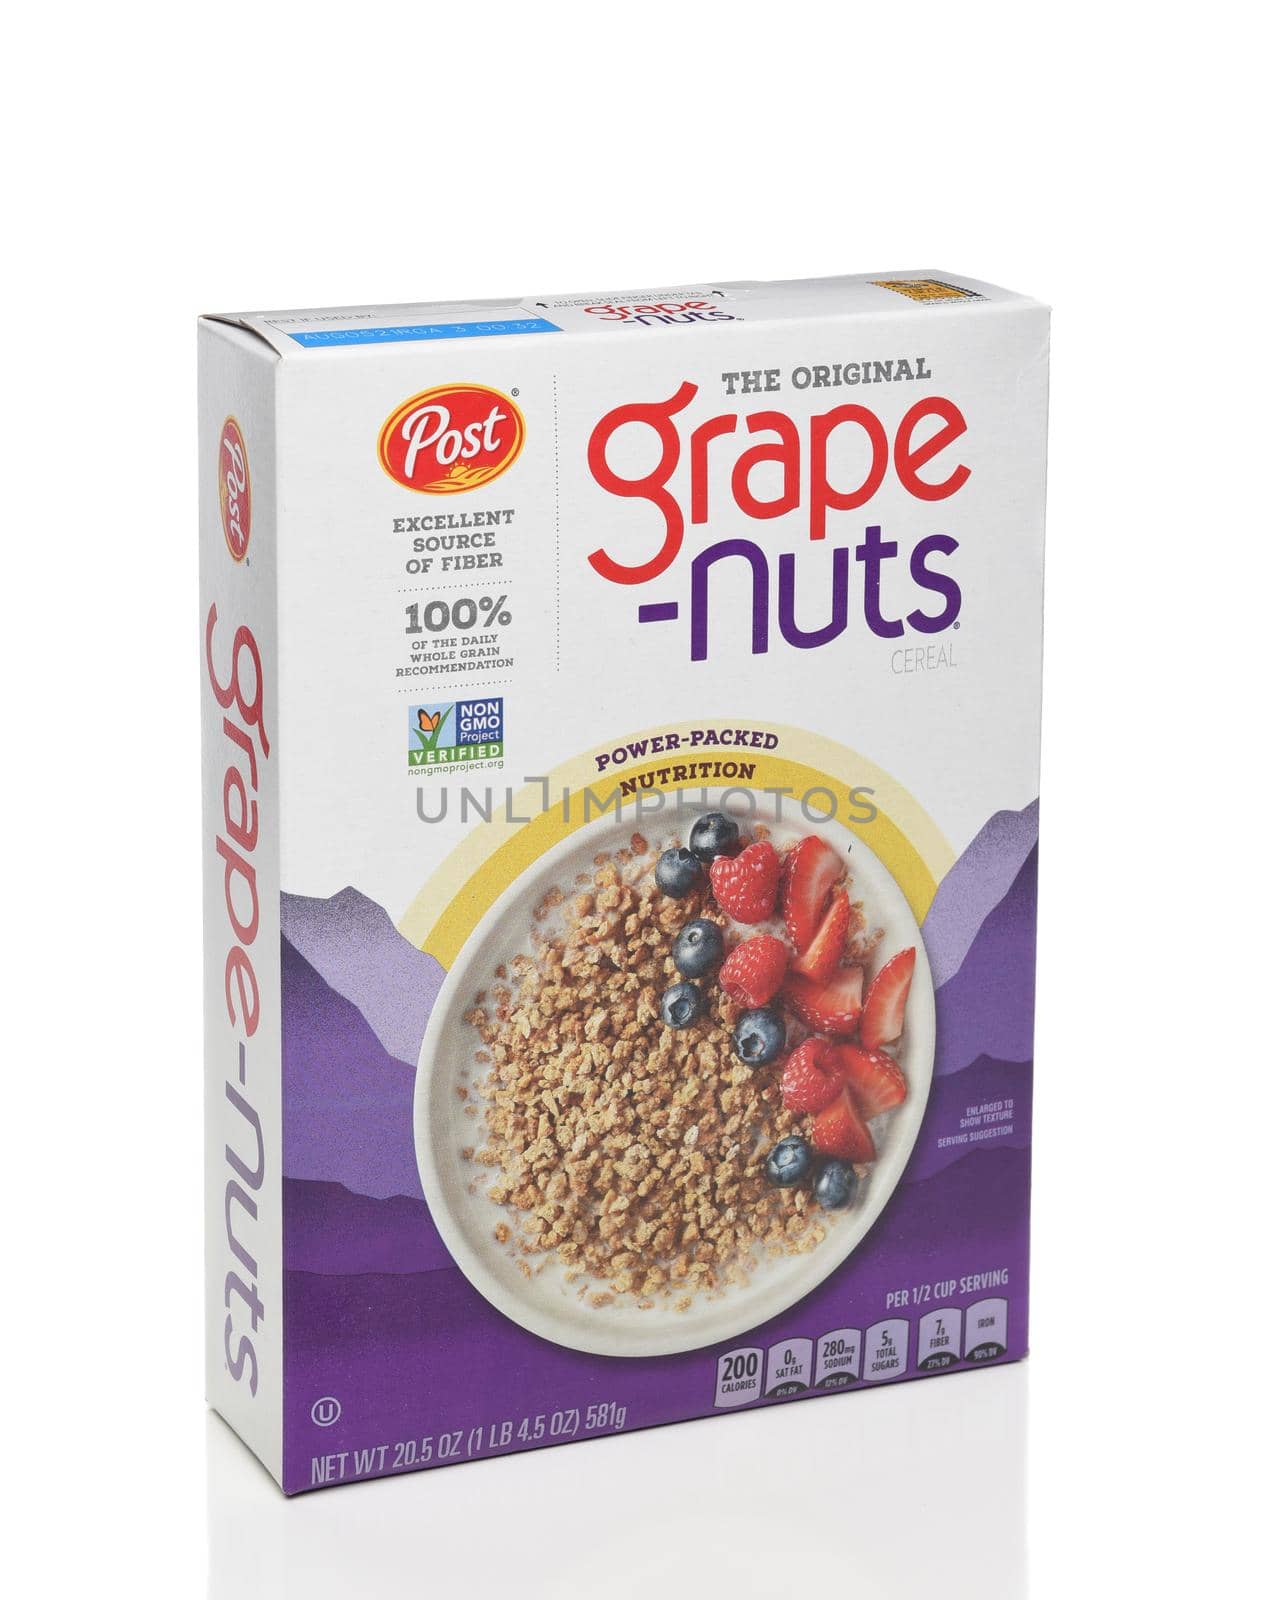 IRVINE, CALIFORNIA - 6 OCT 2020: A box of Post Grape-Nuts Cereal. 